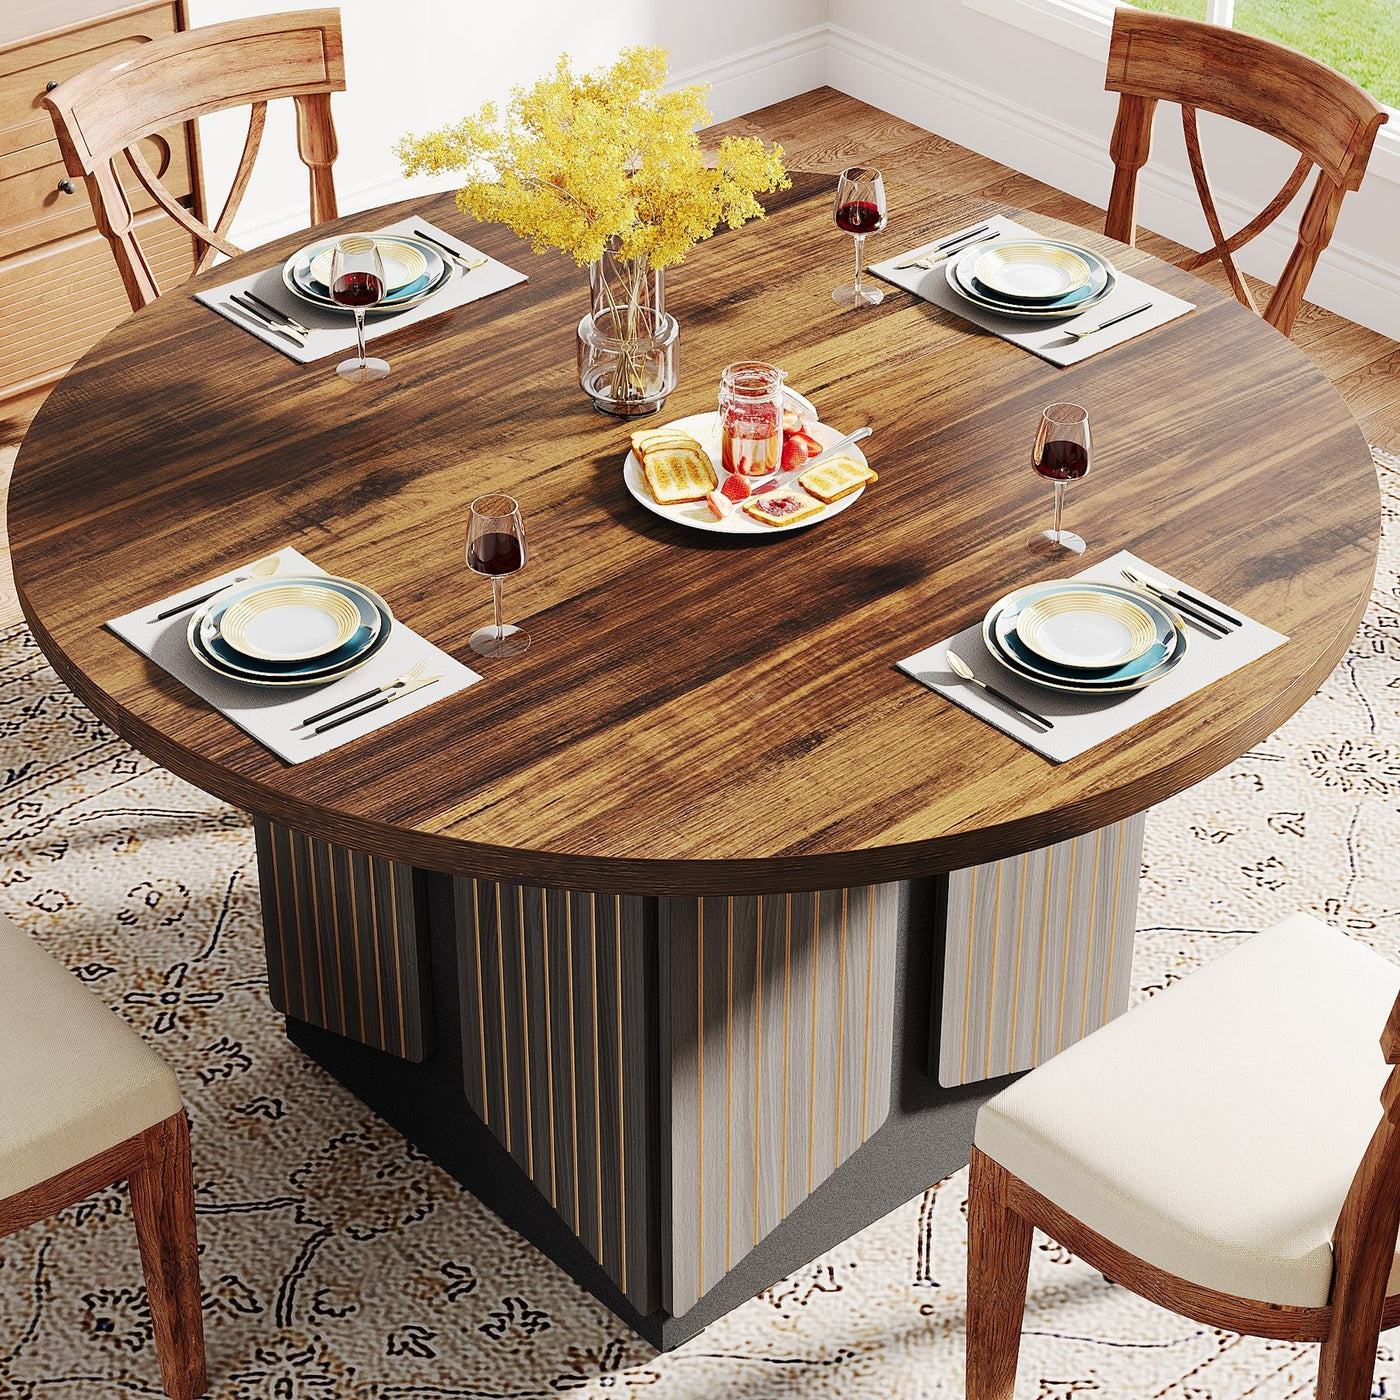 Solid 47" Round Dining Table | Farmhouse Circle Wood Kitchen Table for 4-6 People